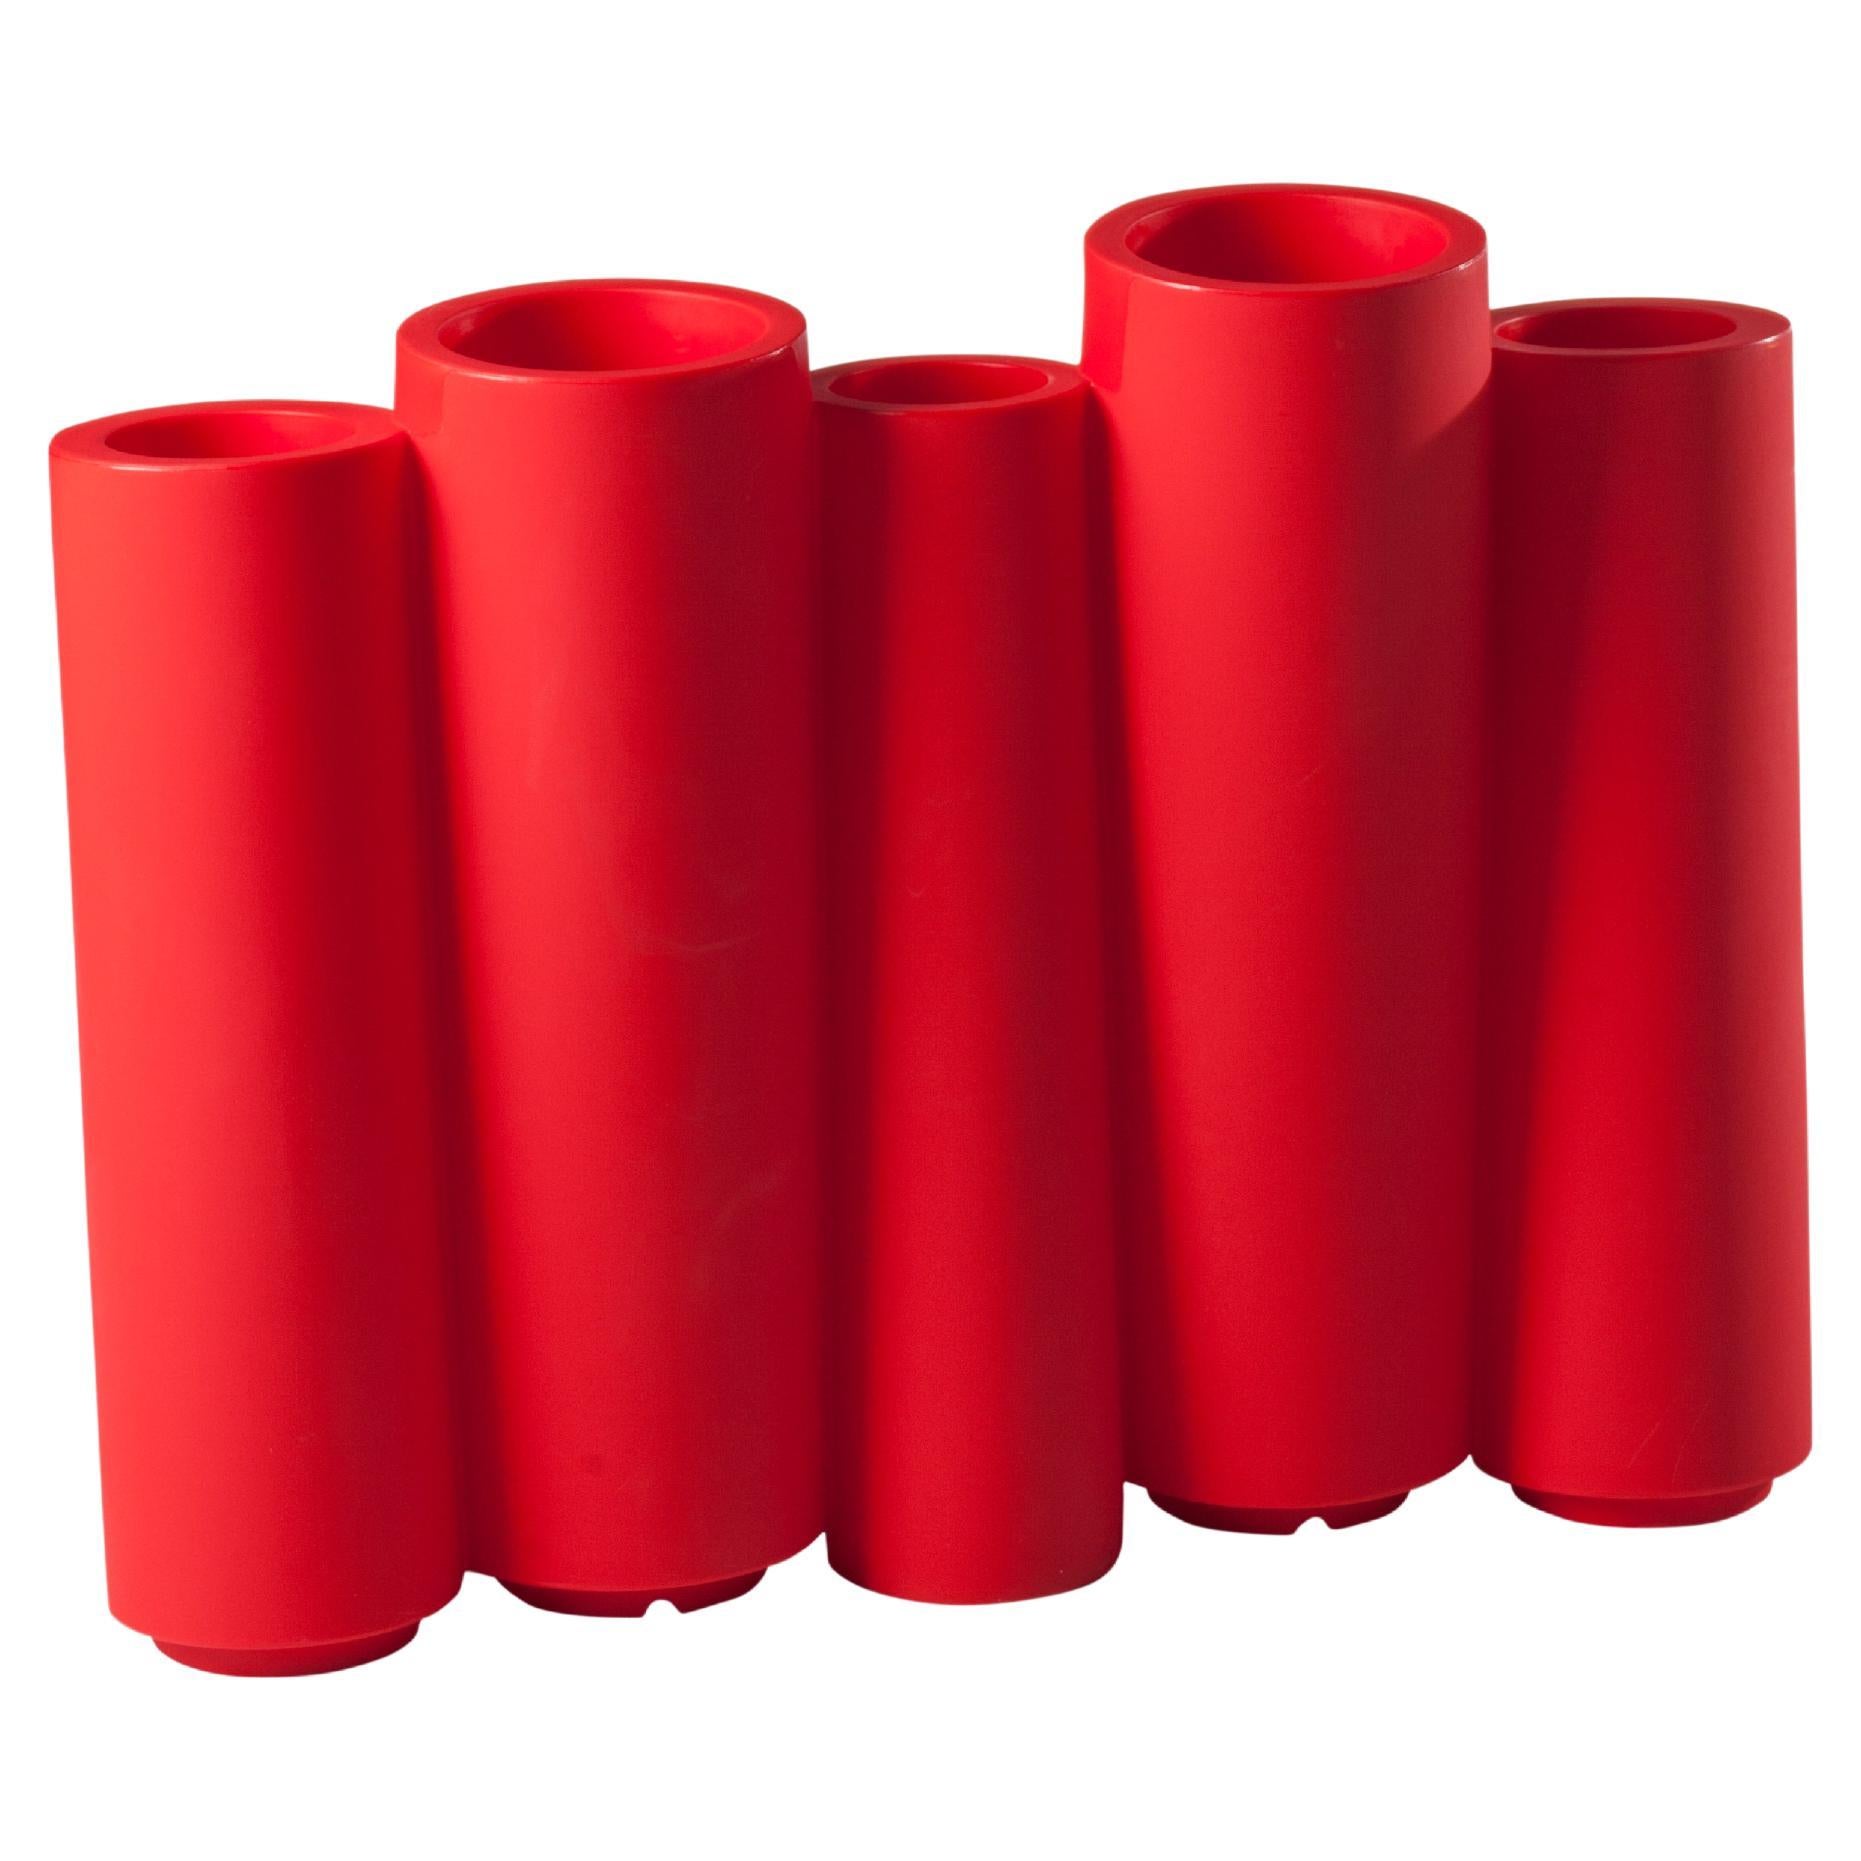 Slide Design Bamboo Cachepot in Flame Red by Tous Les Trois For Sale